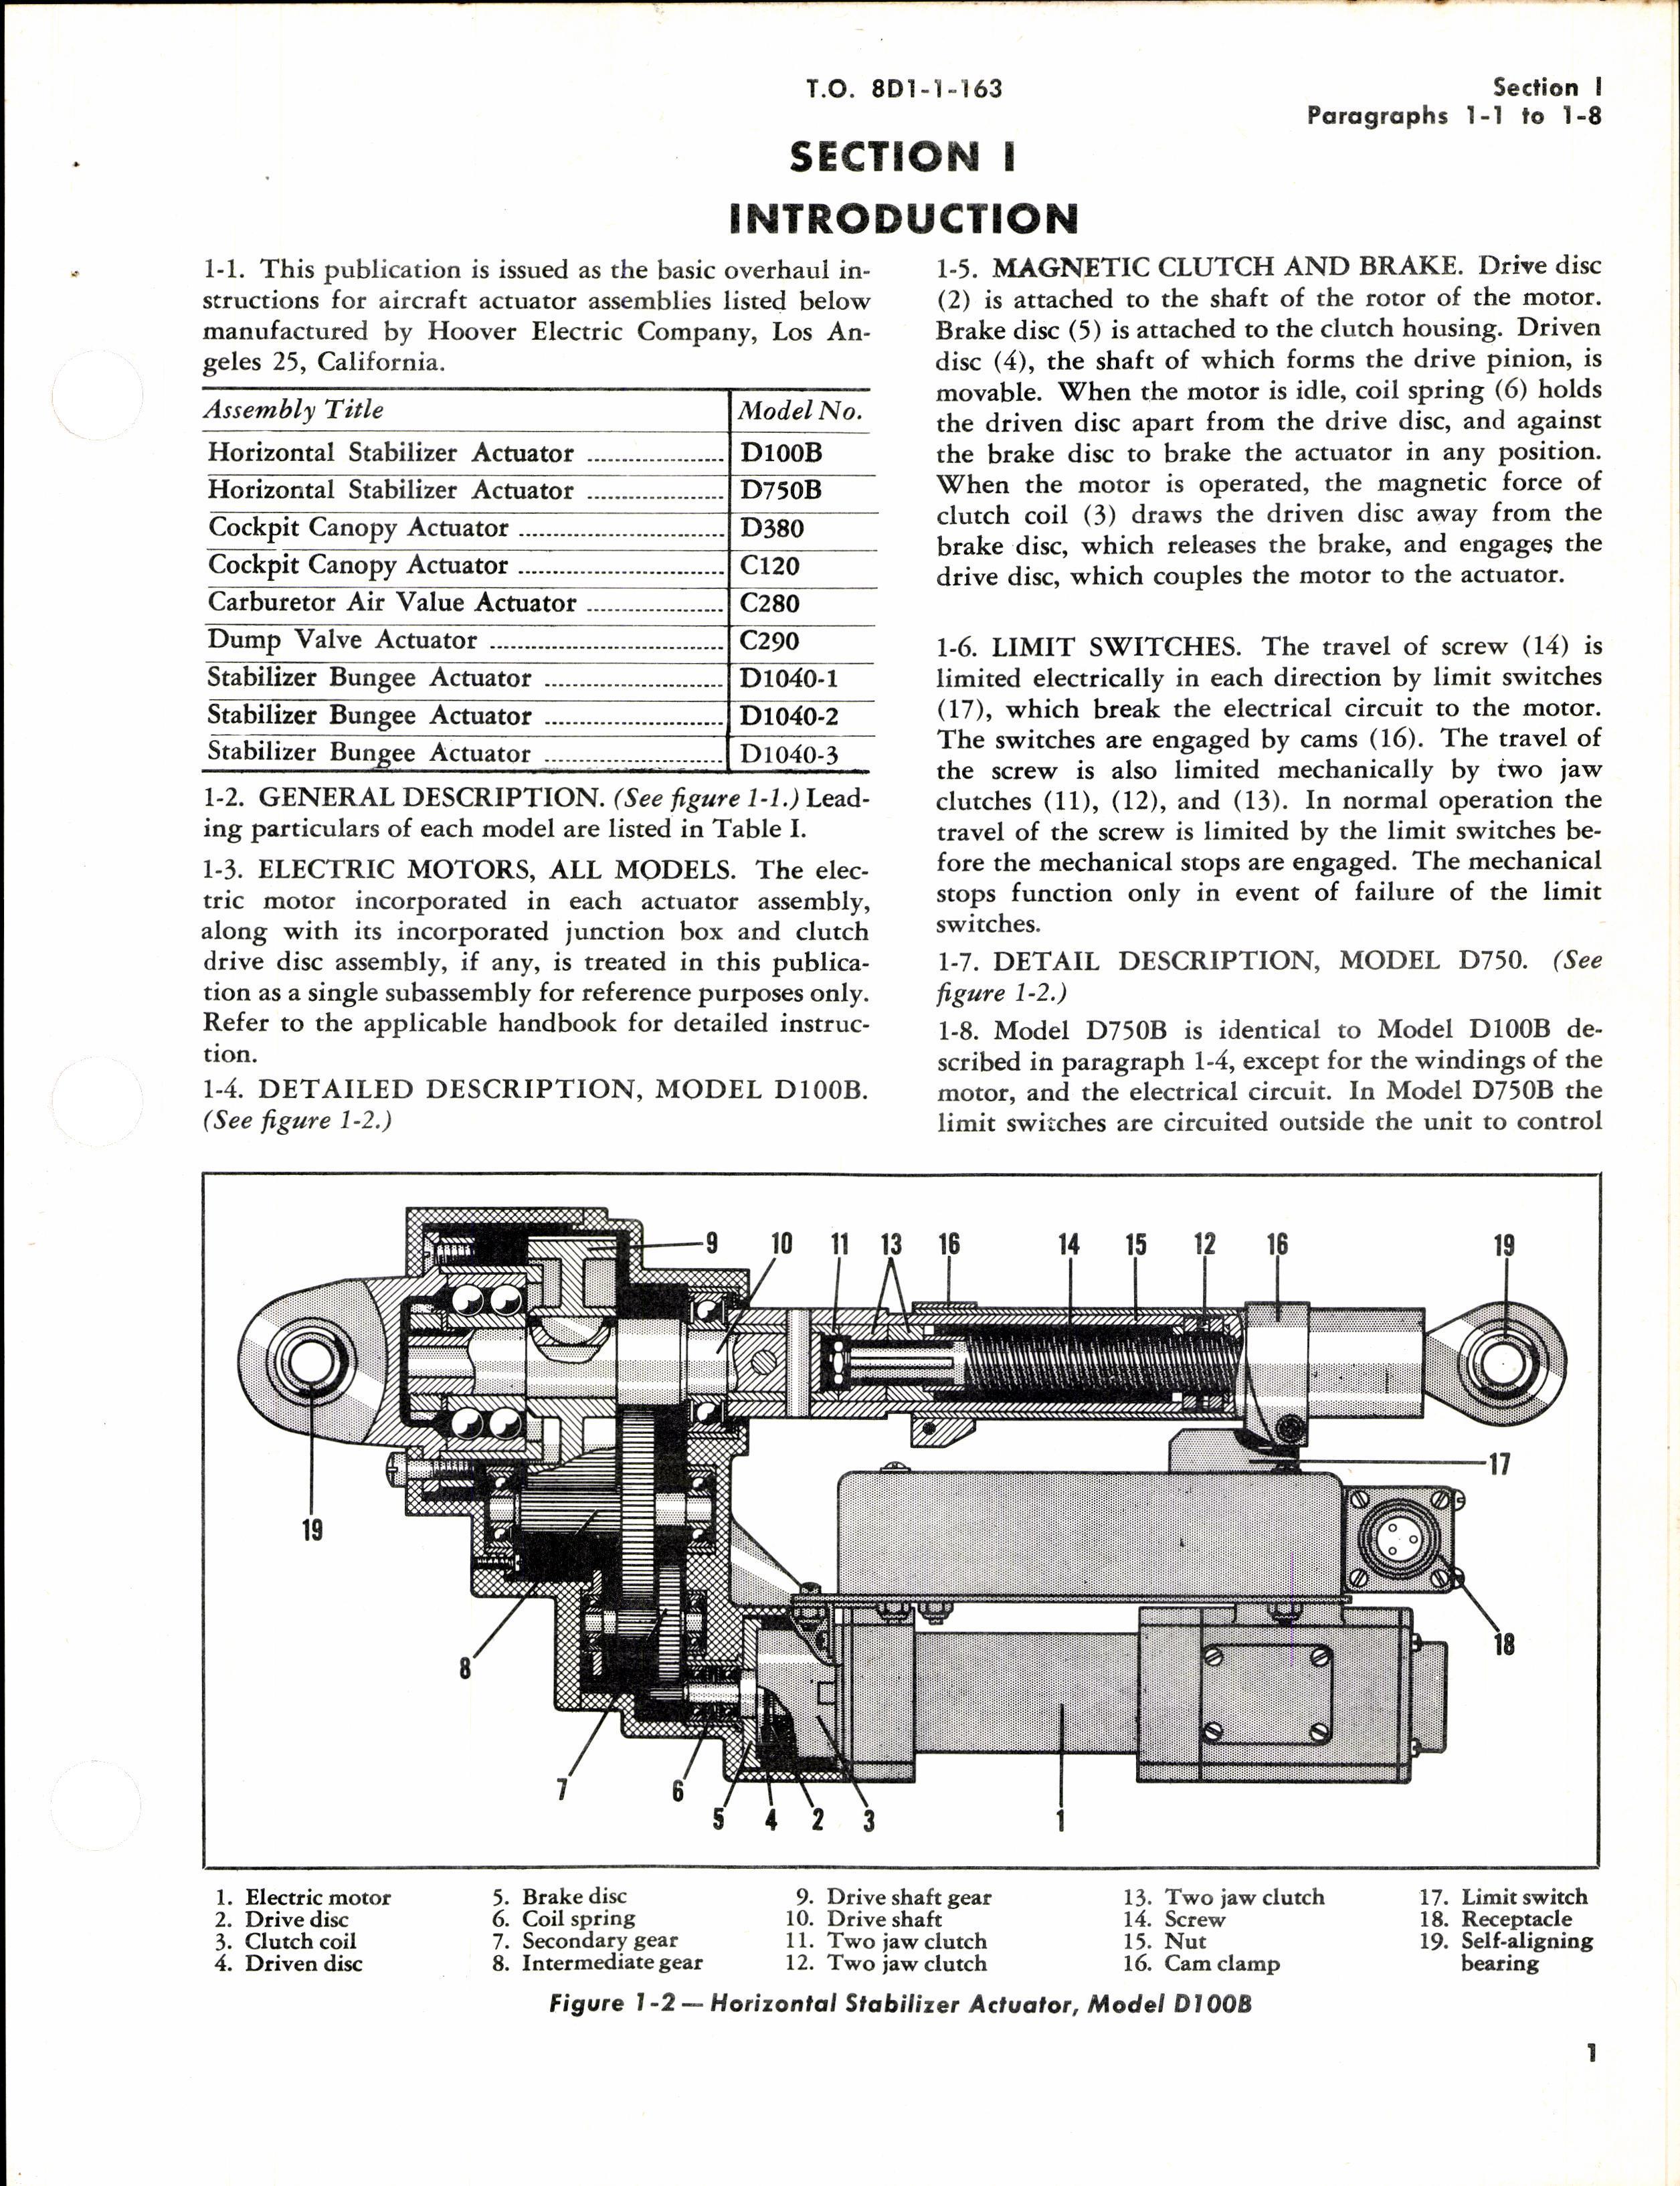 Sample page 5 from AirCorps Library document: Overhaul Instructions for Aircraft Actuators Models D100B, D750B, D380, D1040-1, D1040-2, D1040-3, C120, C280, and C290